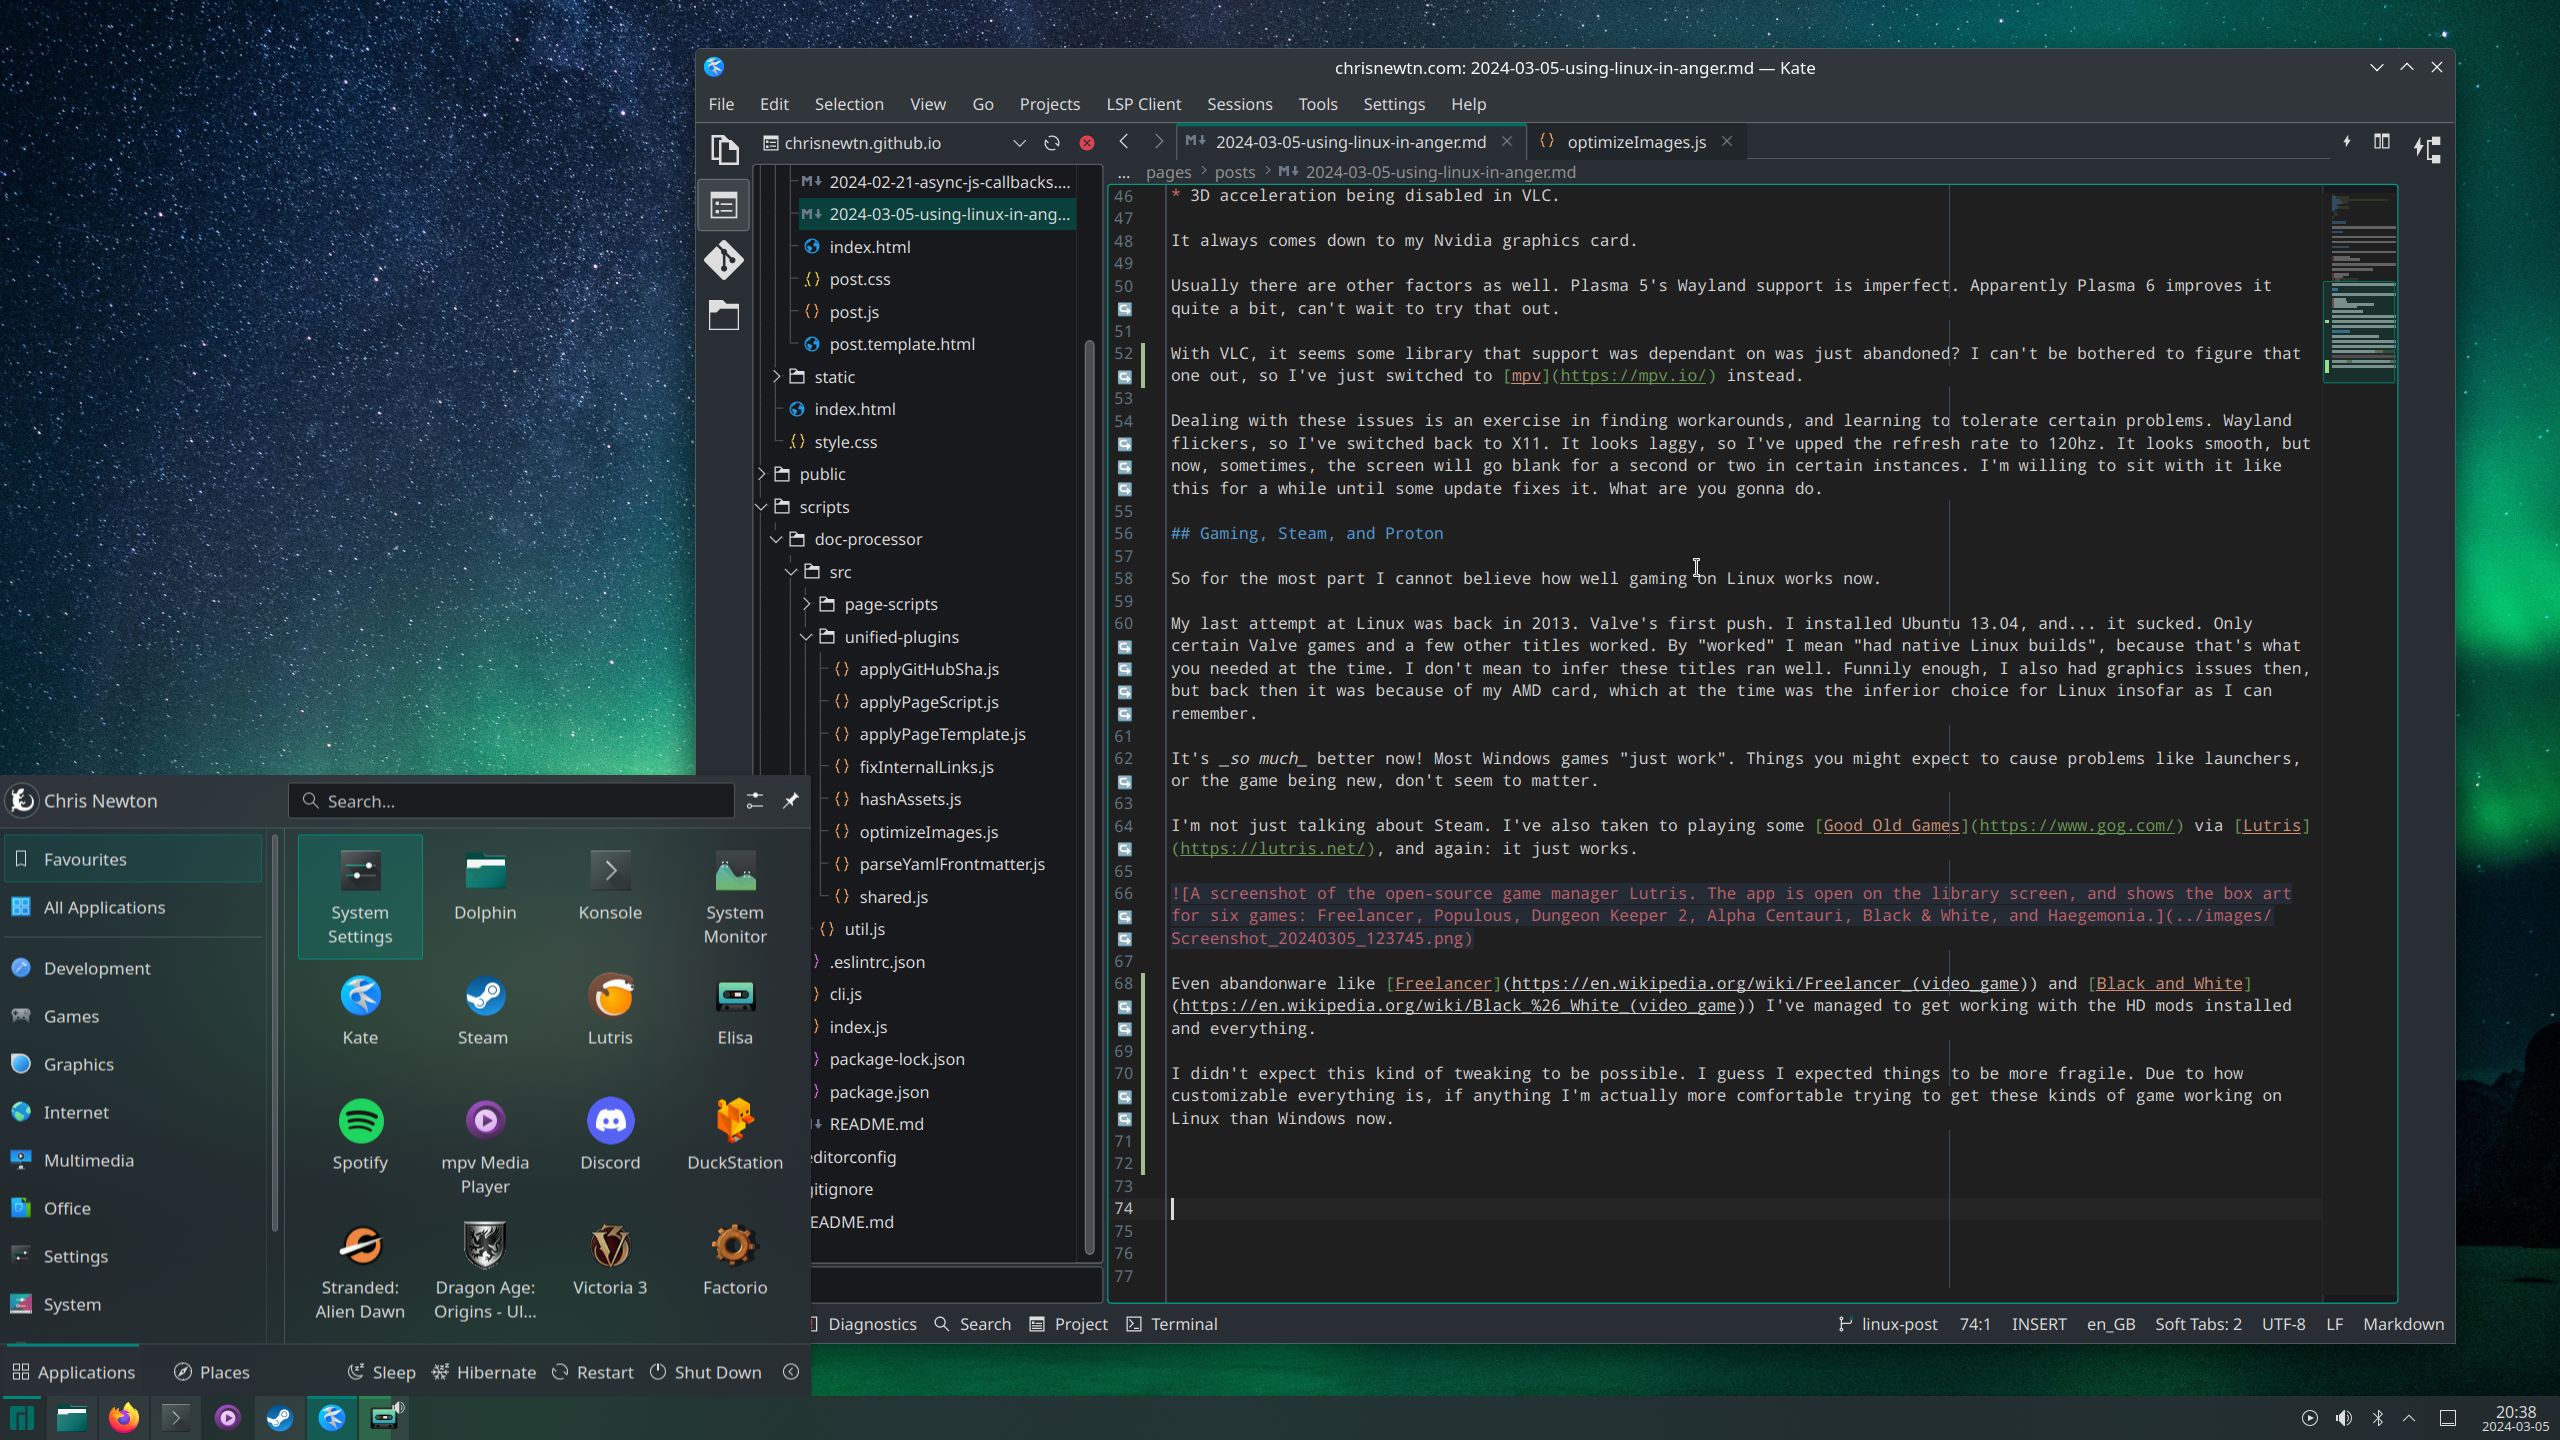 A screenshot of my KDE Plasma desktop. The text editor Kate is open on the Markdown file of this article. Also open is the Application Launcher, which is similar to Windows' Start Menu.